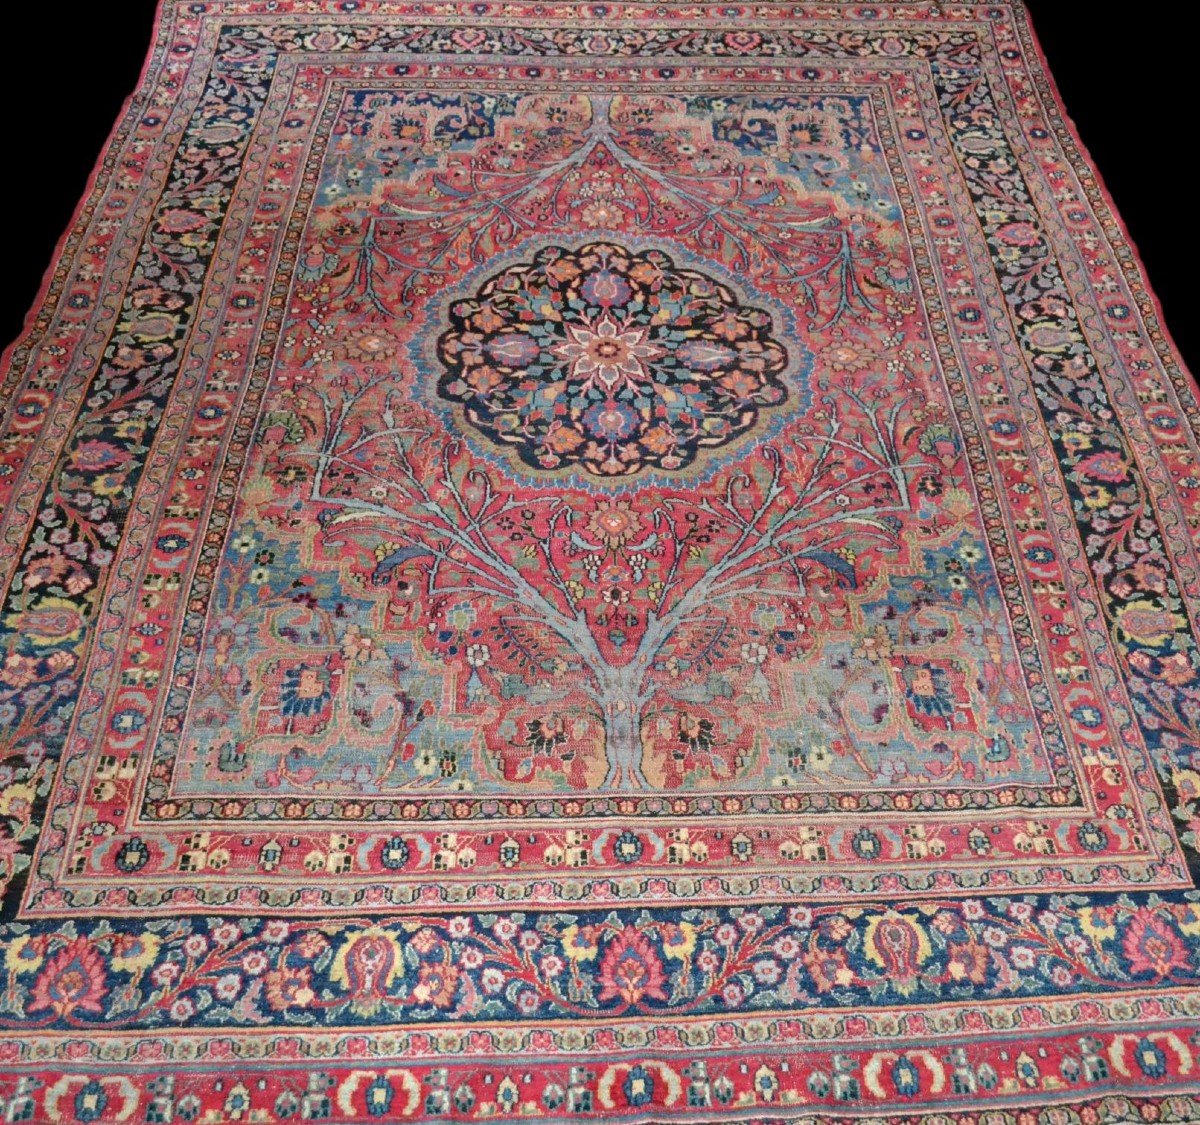 Important Old Tabriz, 253 X 357 Cm, Hand-knotted Wool In Persia (iran) In The 19th Century